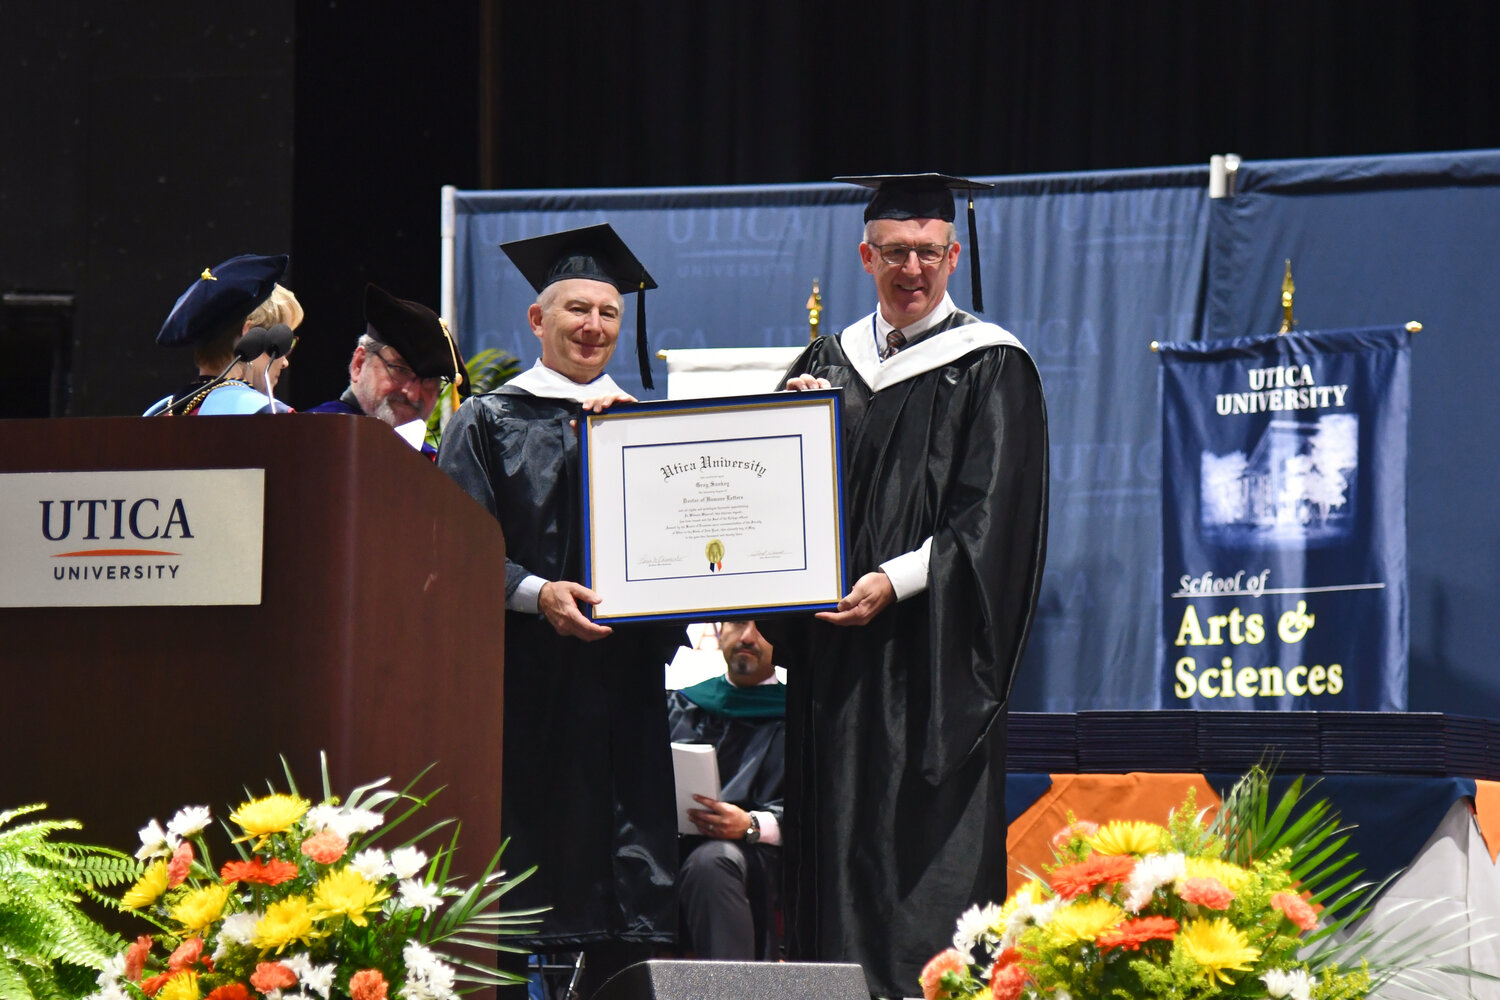 In addition to being the Utica University 74th undergraduate commencement keynote speaker, SEC Commissioner Greg Sanky was awarded the honorary Doctor of Humane Letters degree by the university.